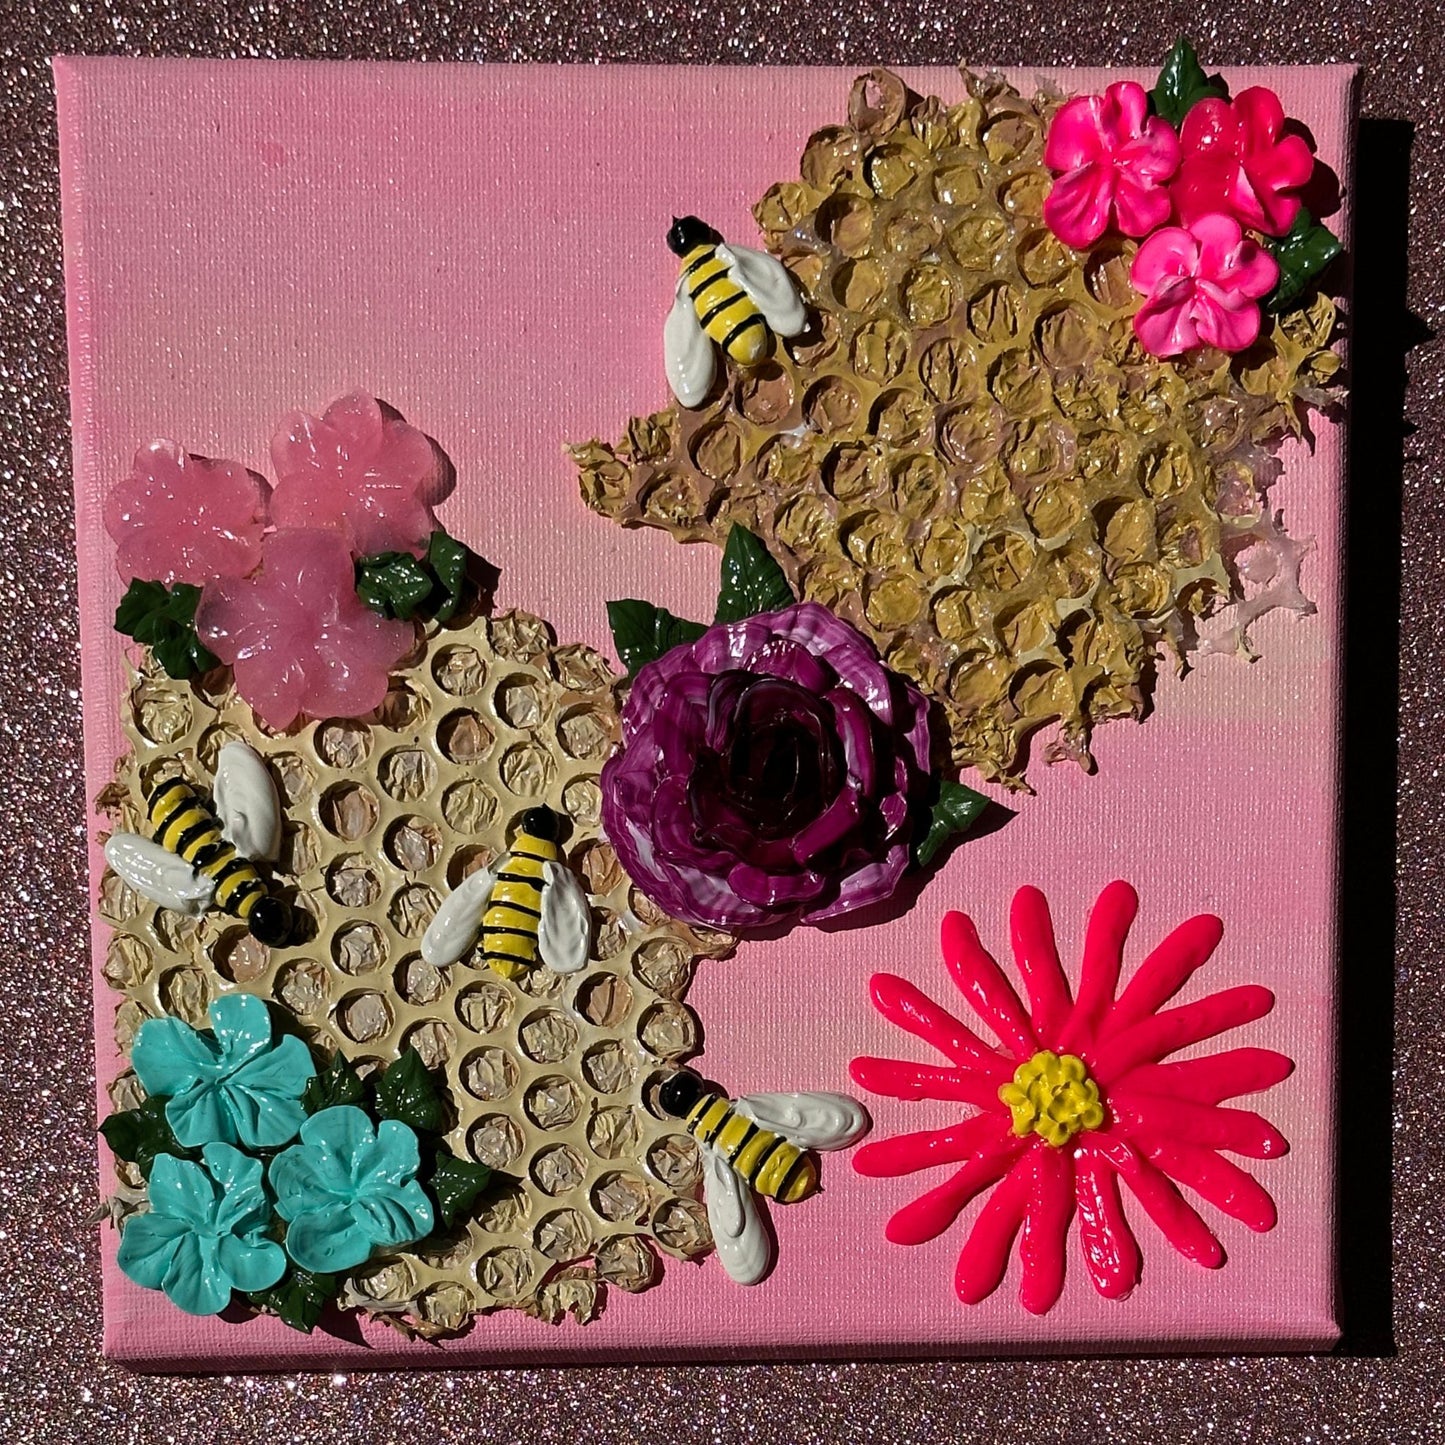 3D Bees and Multicolored Flowers on Pink Canvas 8"x8"